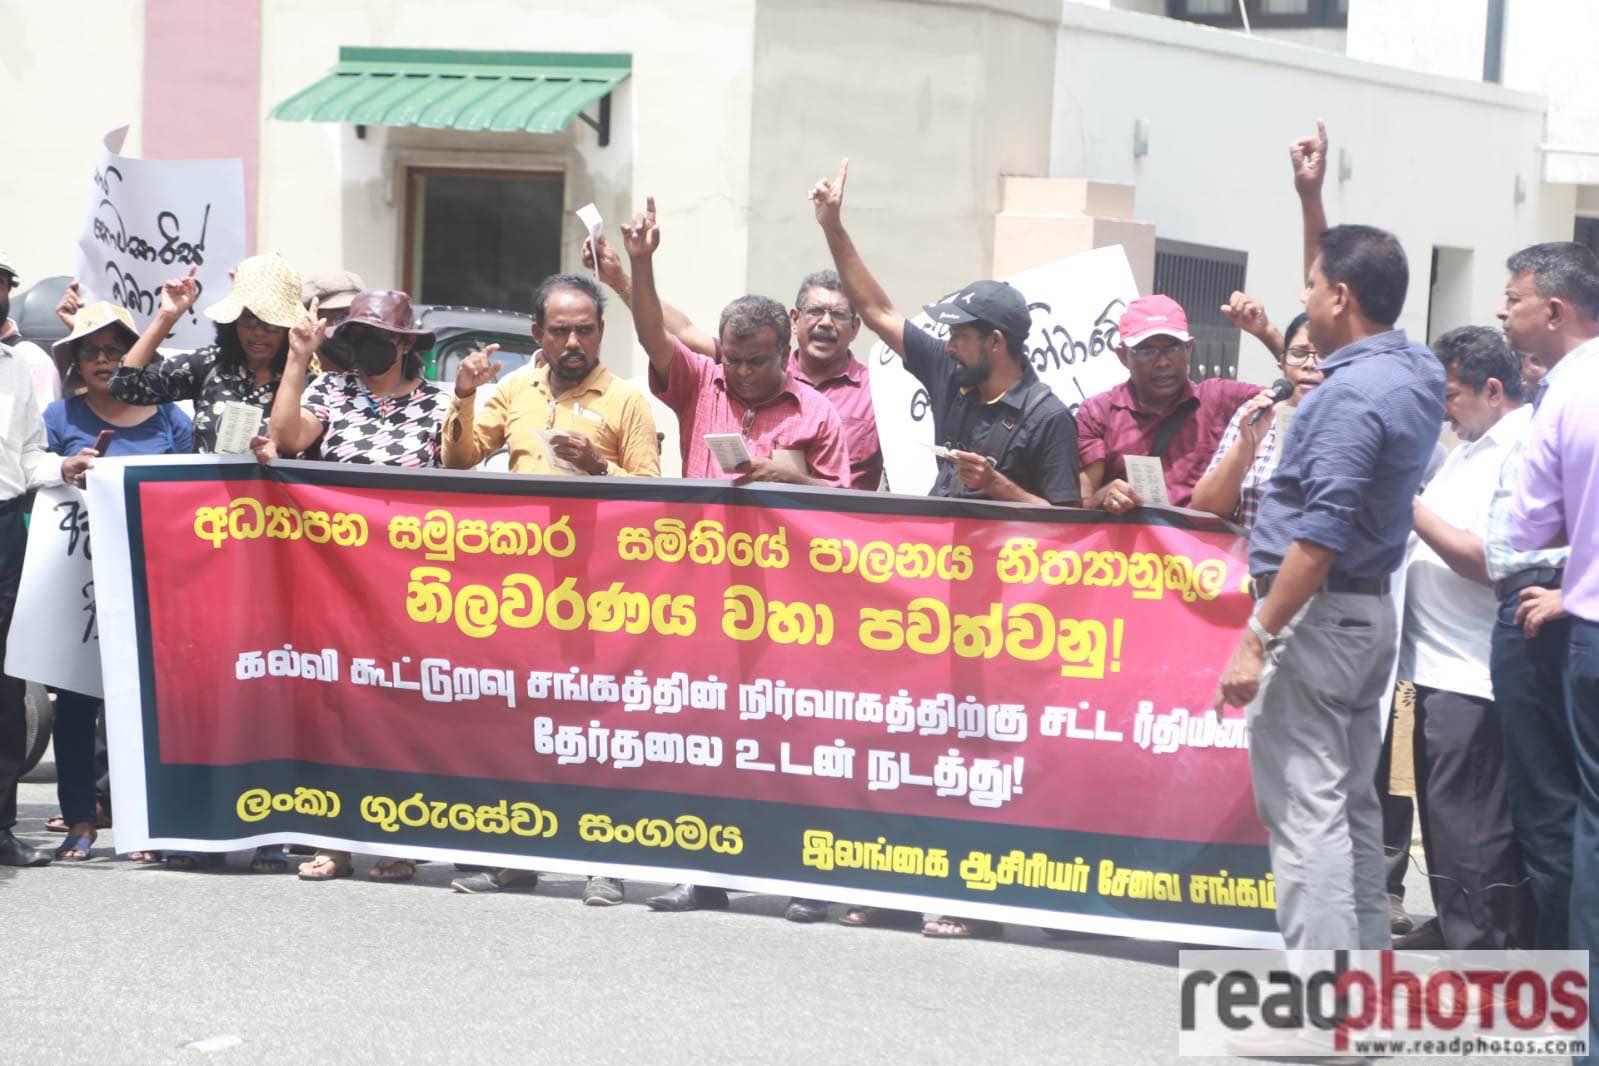 Ceylon Teachers Service Union protests against the Education Cooperative Society - Read Photos